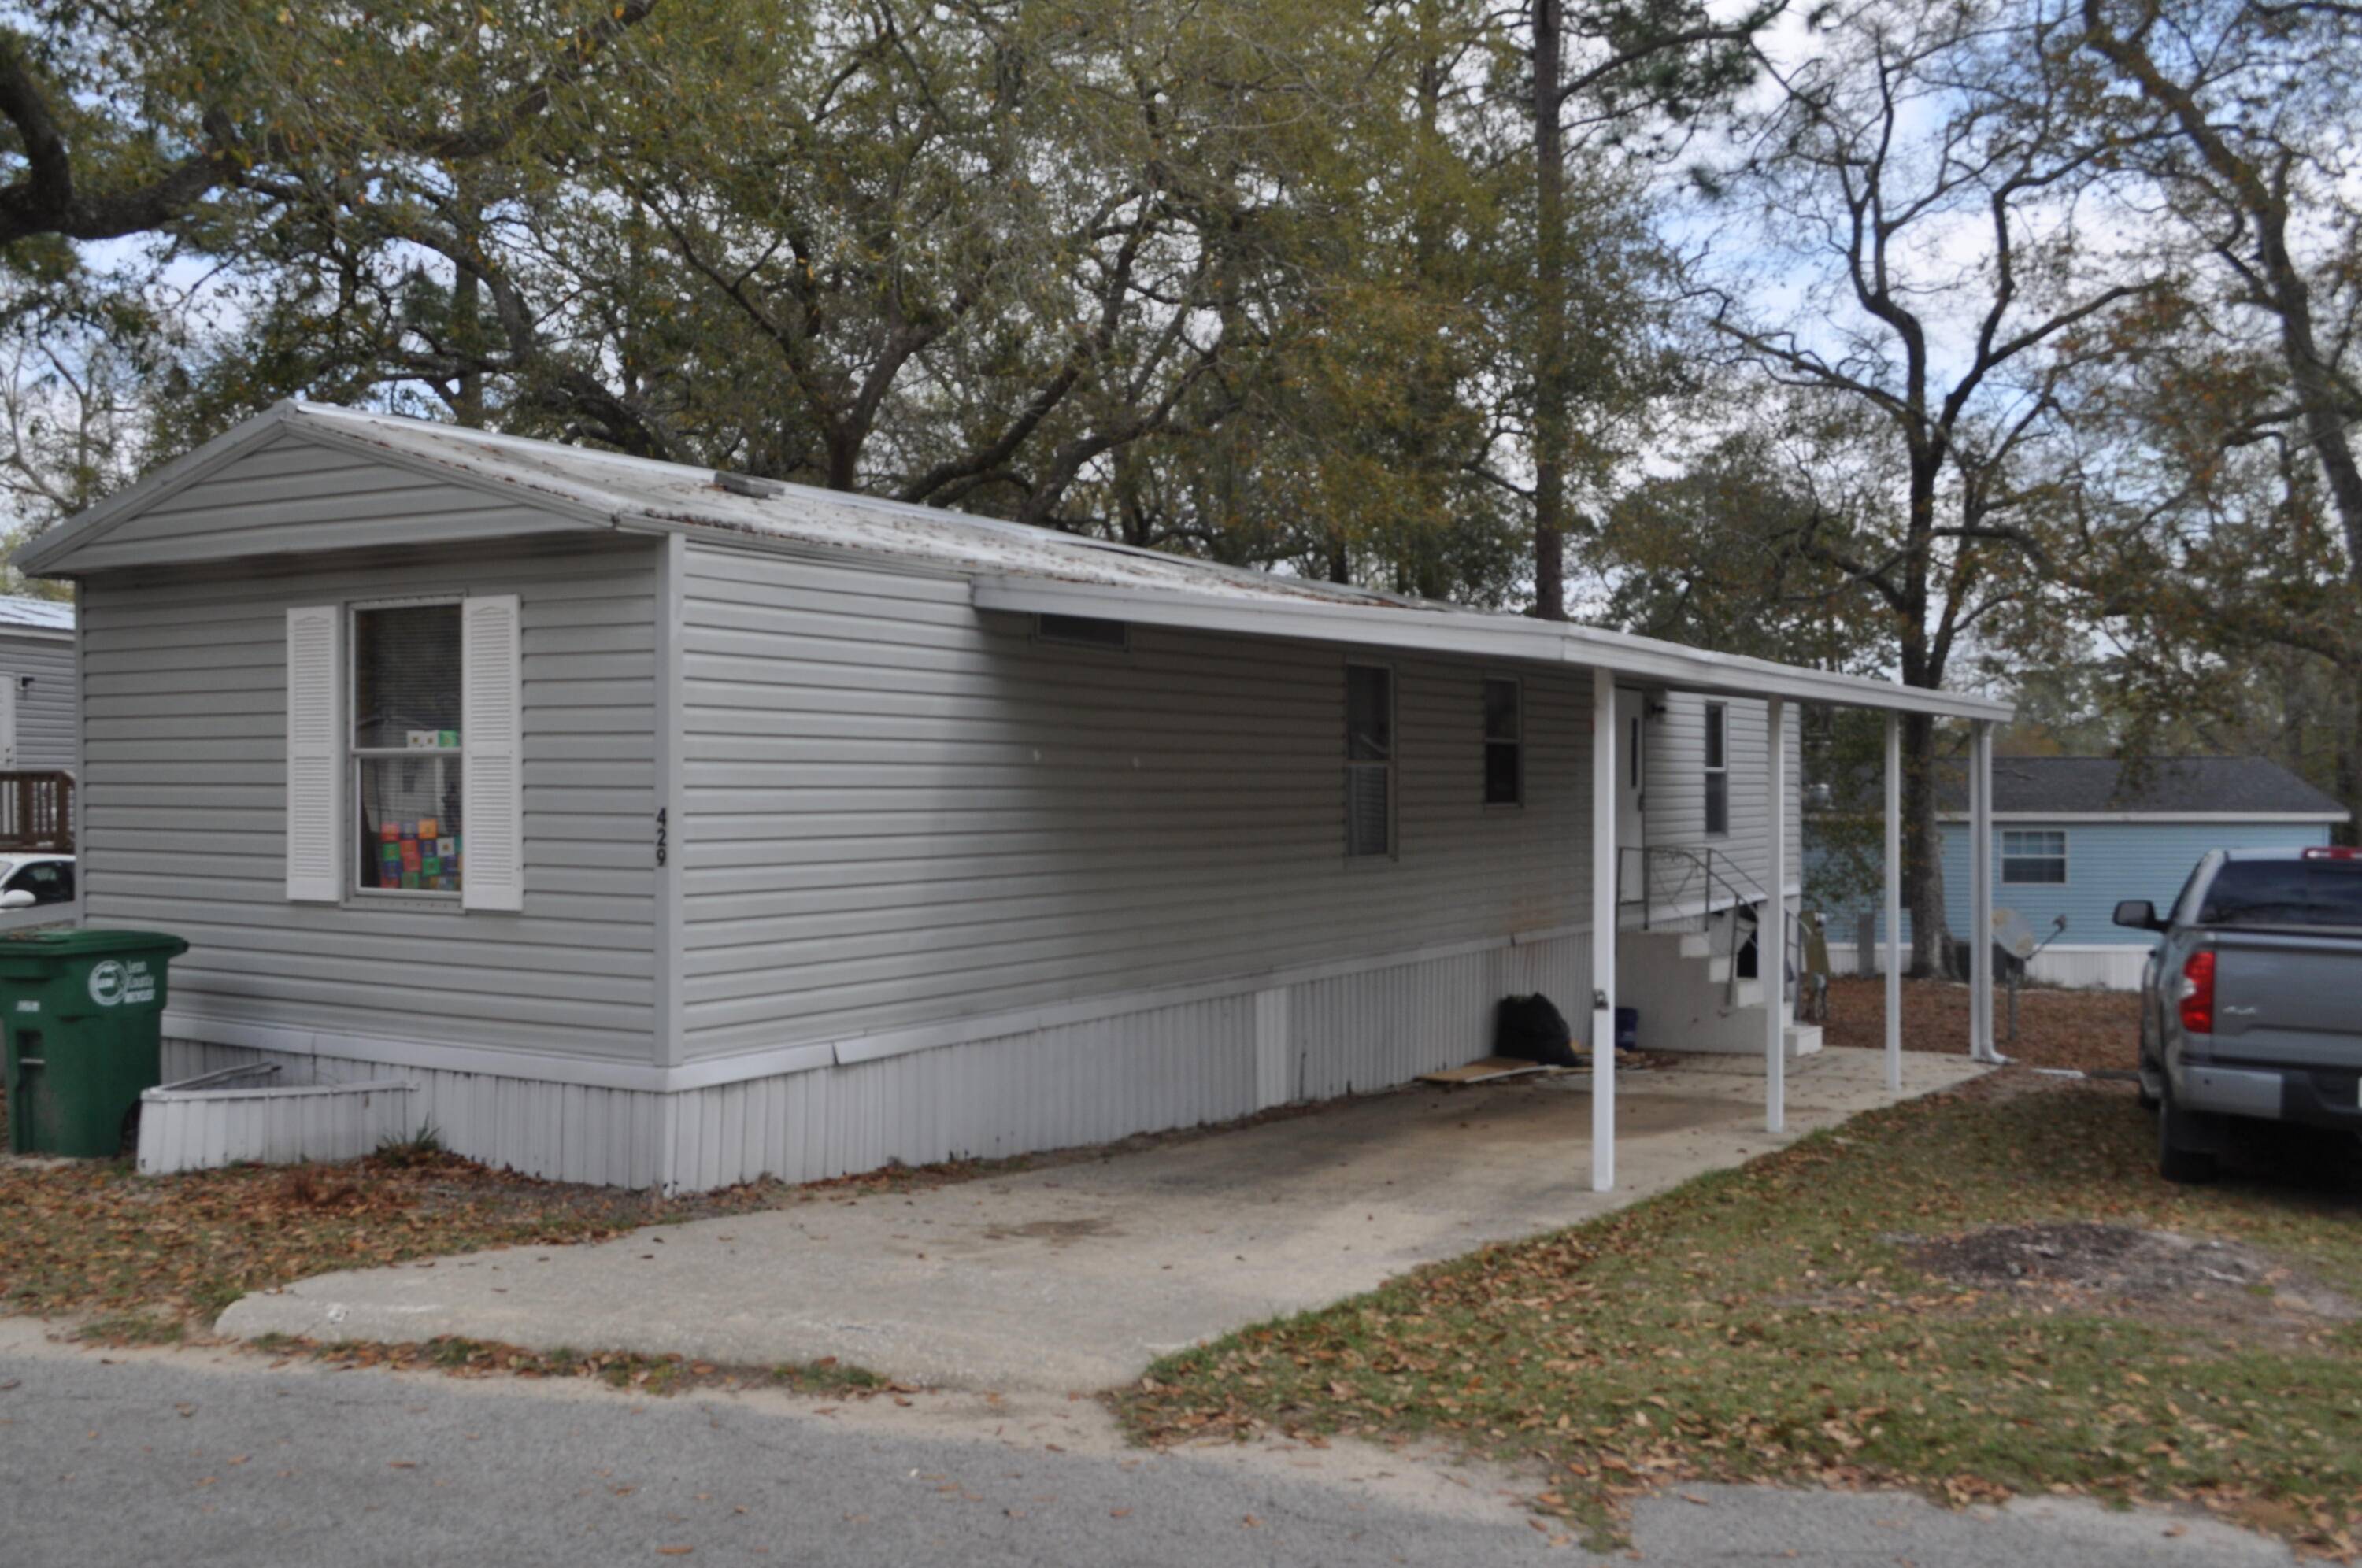 Remodeled 2 2 mobile home centrally located close to major roads, supermarket, 2 carports.